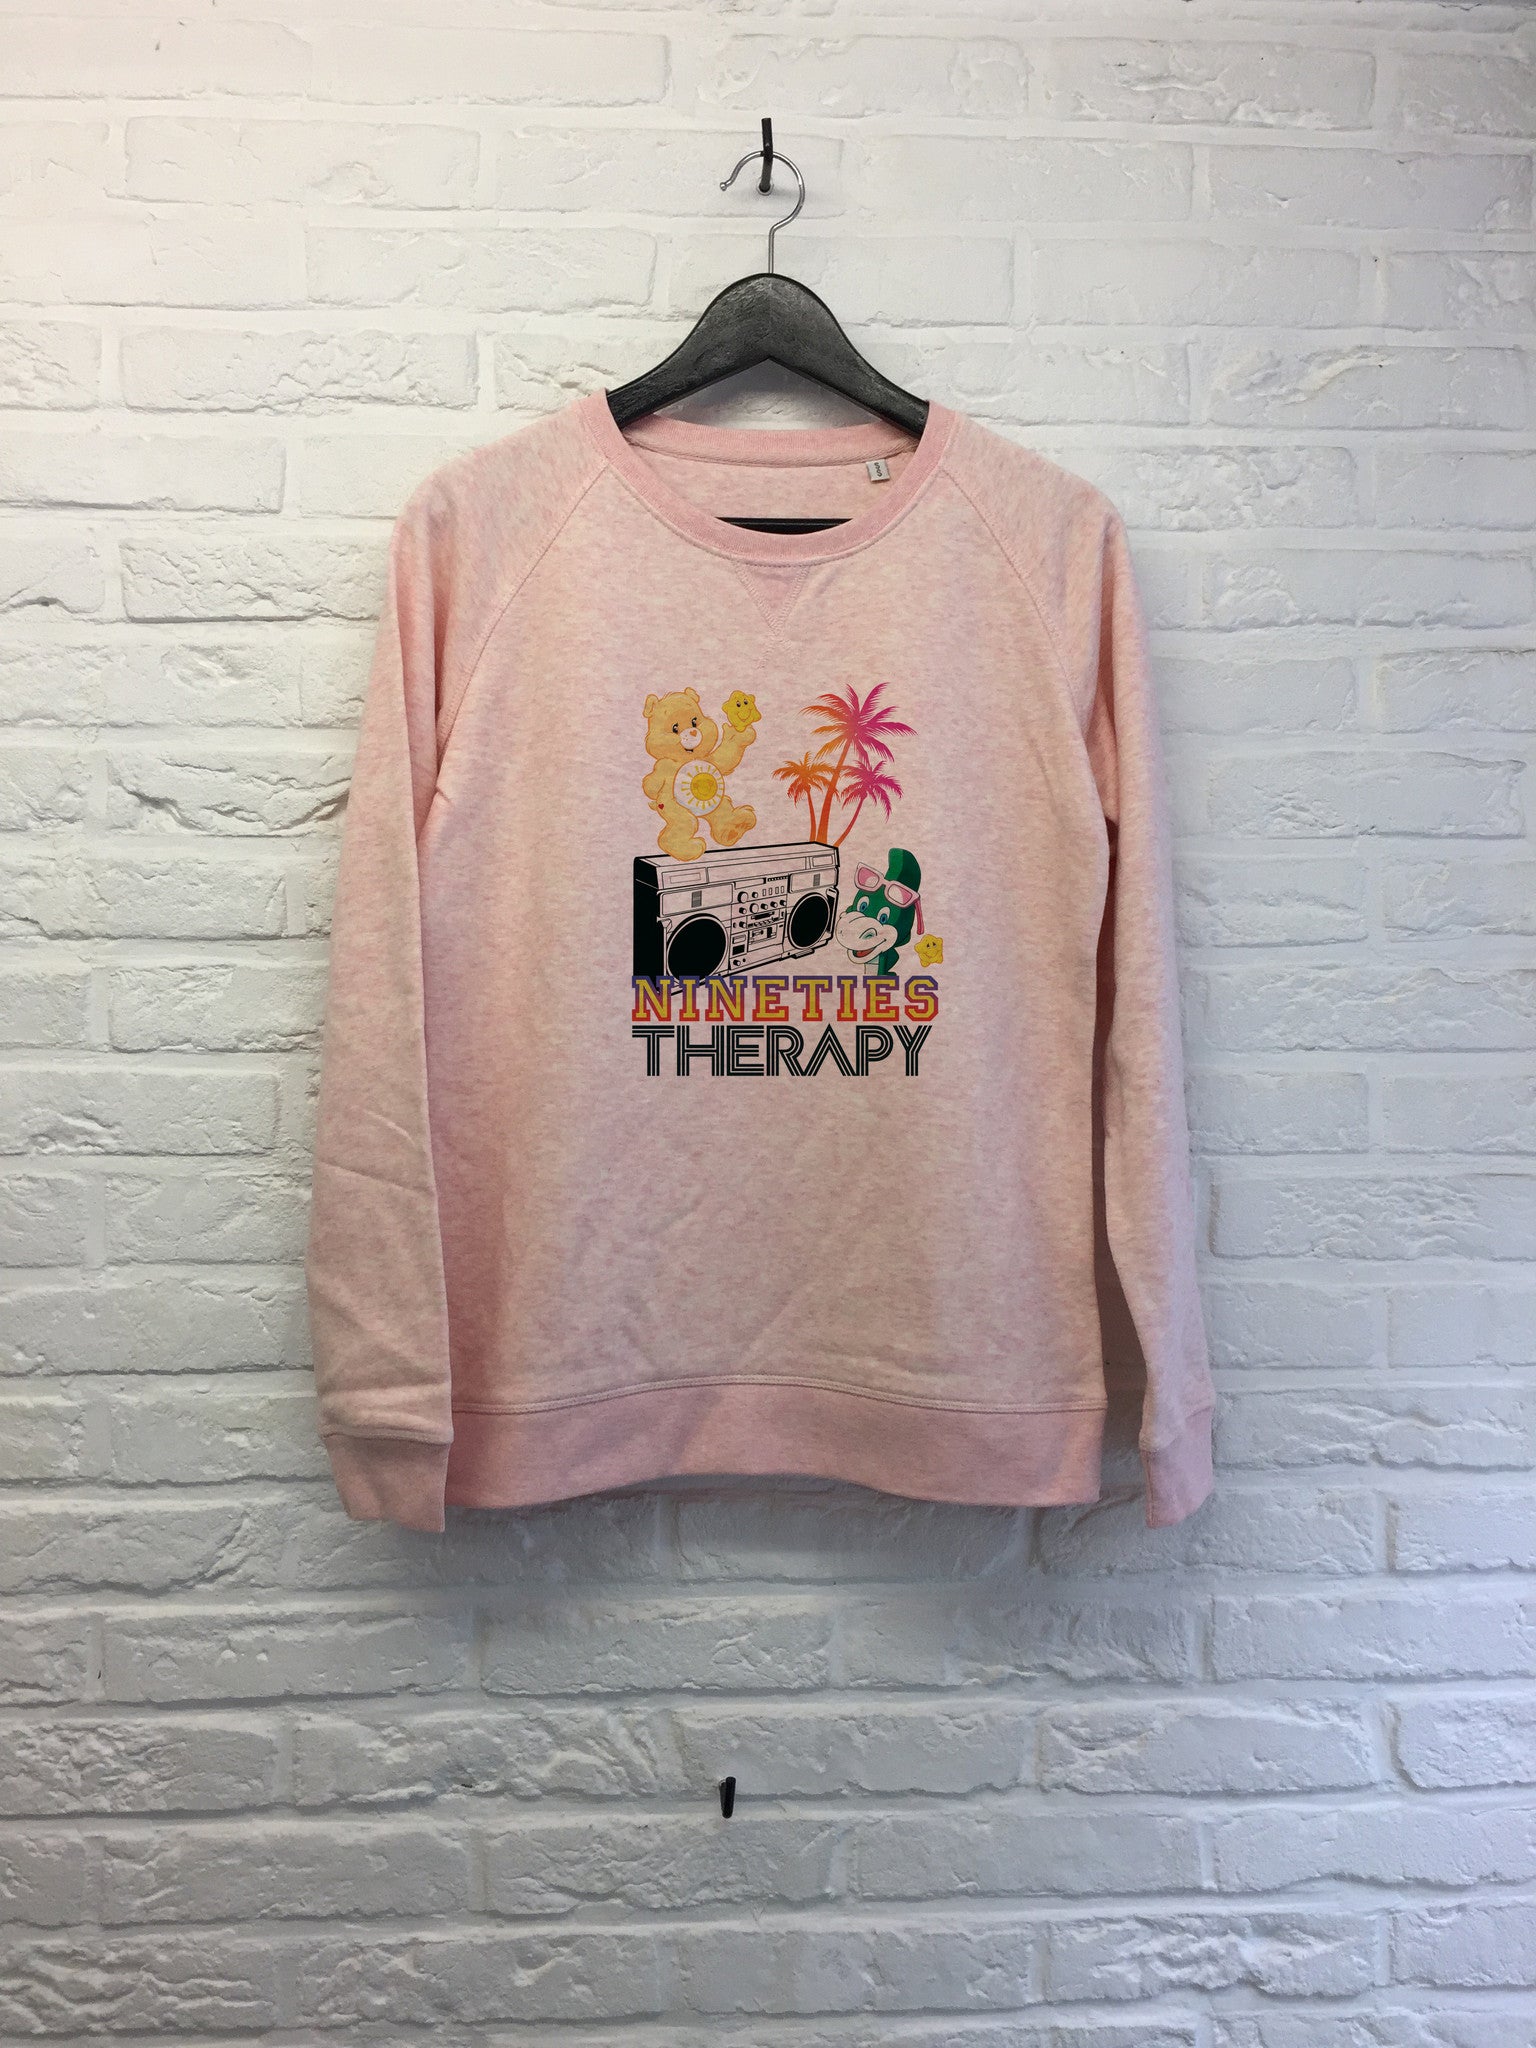 Nineties therapy - Sweat Femme-Sweat shirts-Atelier Amelot